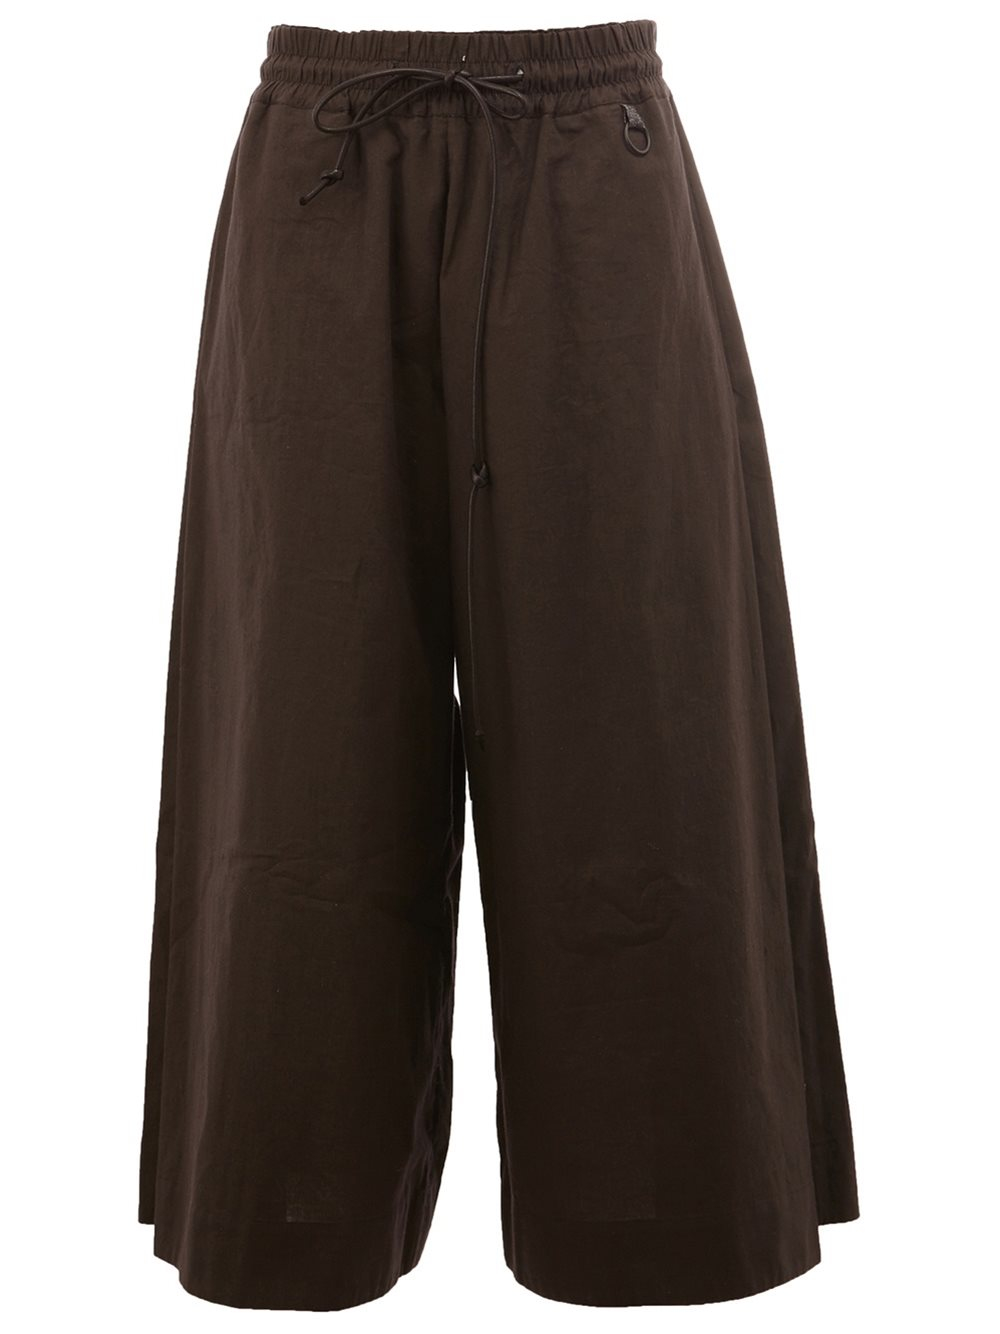 Lyst - Toogood 'the Boxer' Cropped Trousers in Brown